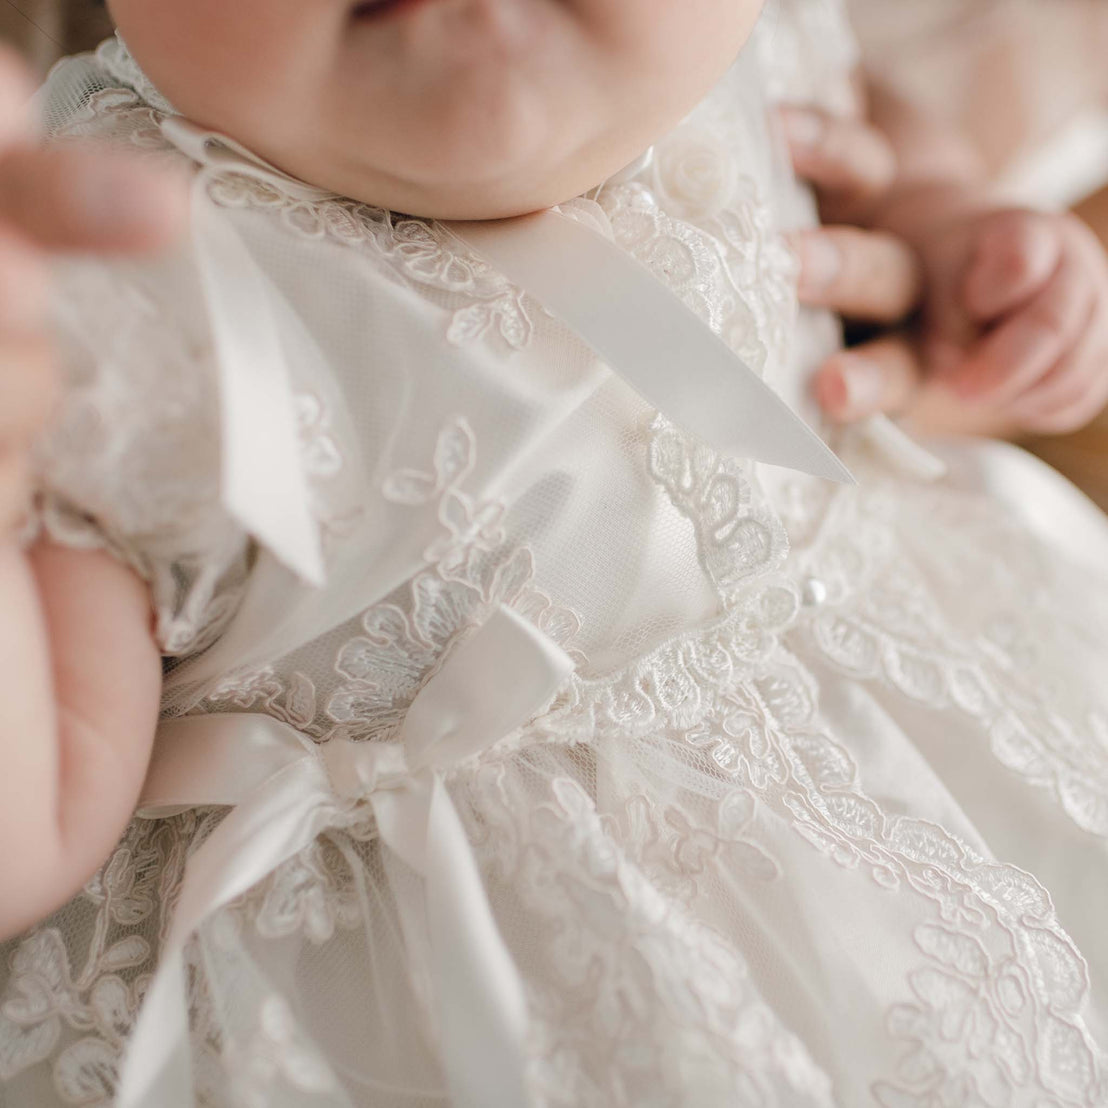 Baby girl traditional christening heirloom gown lace and ribbon bodice detail